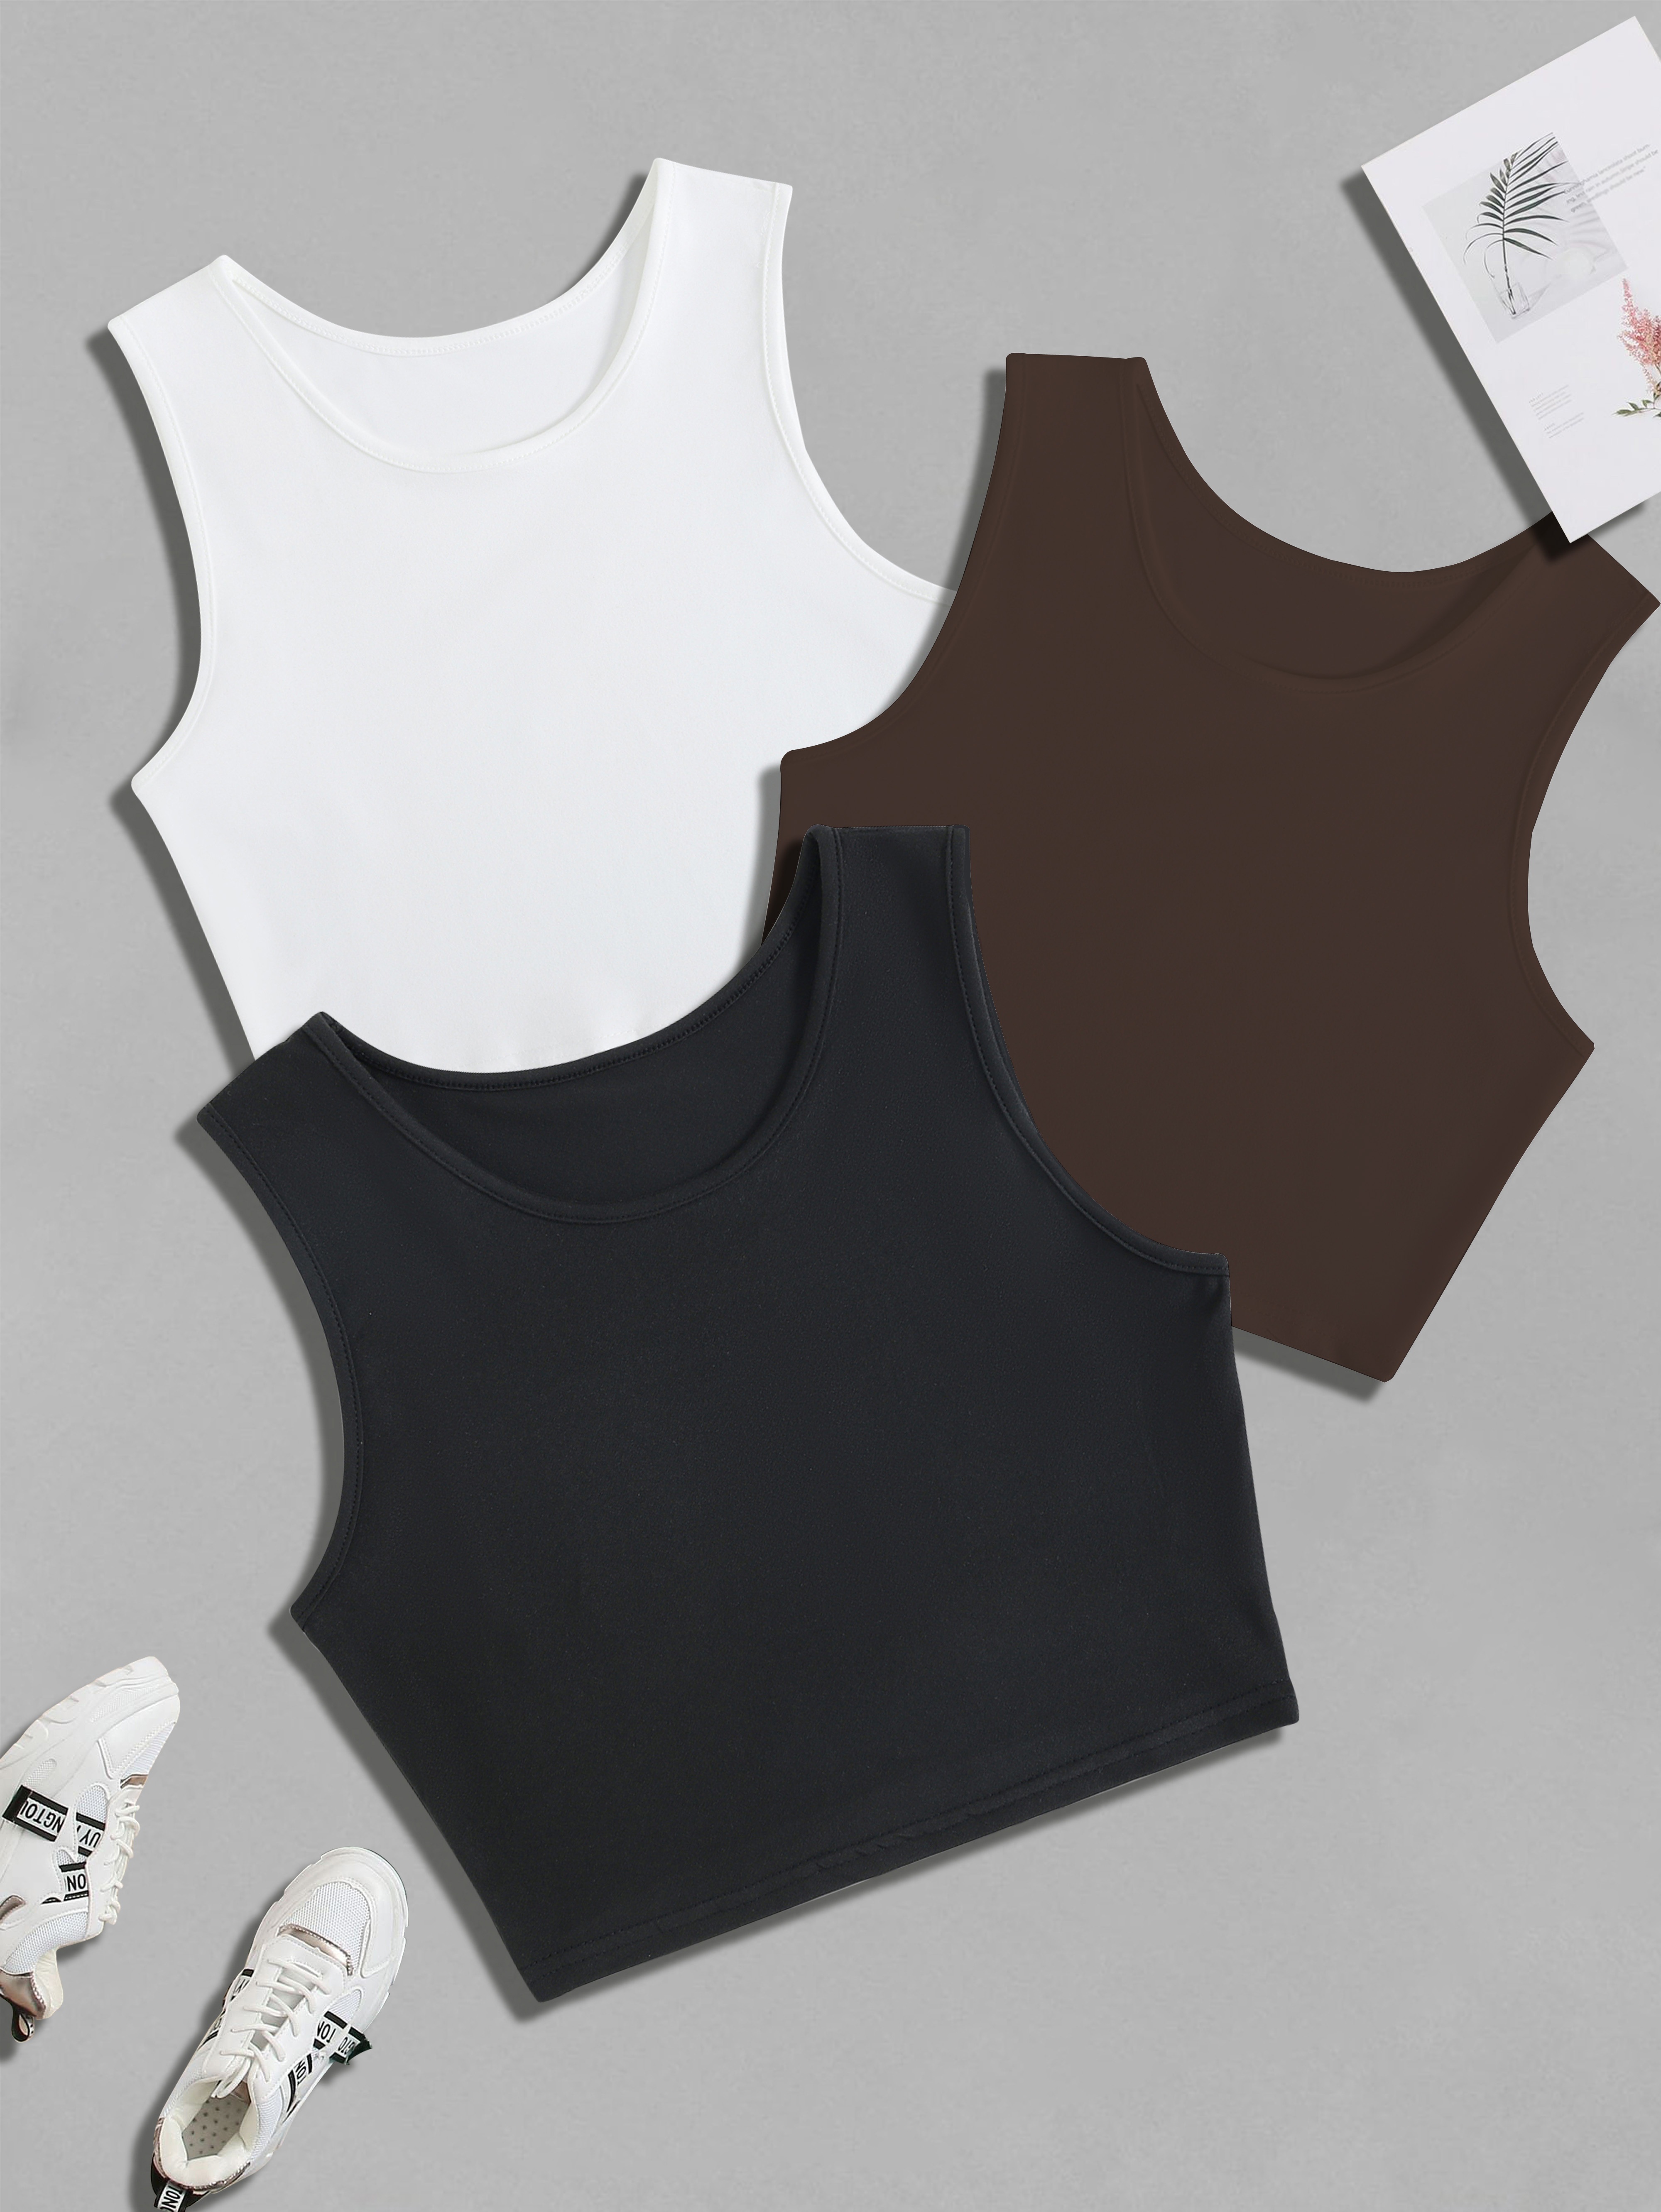 3PCS Womens Camisole Tops for Summer - Women's Cami Tank Top